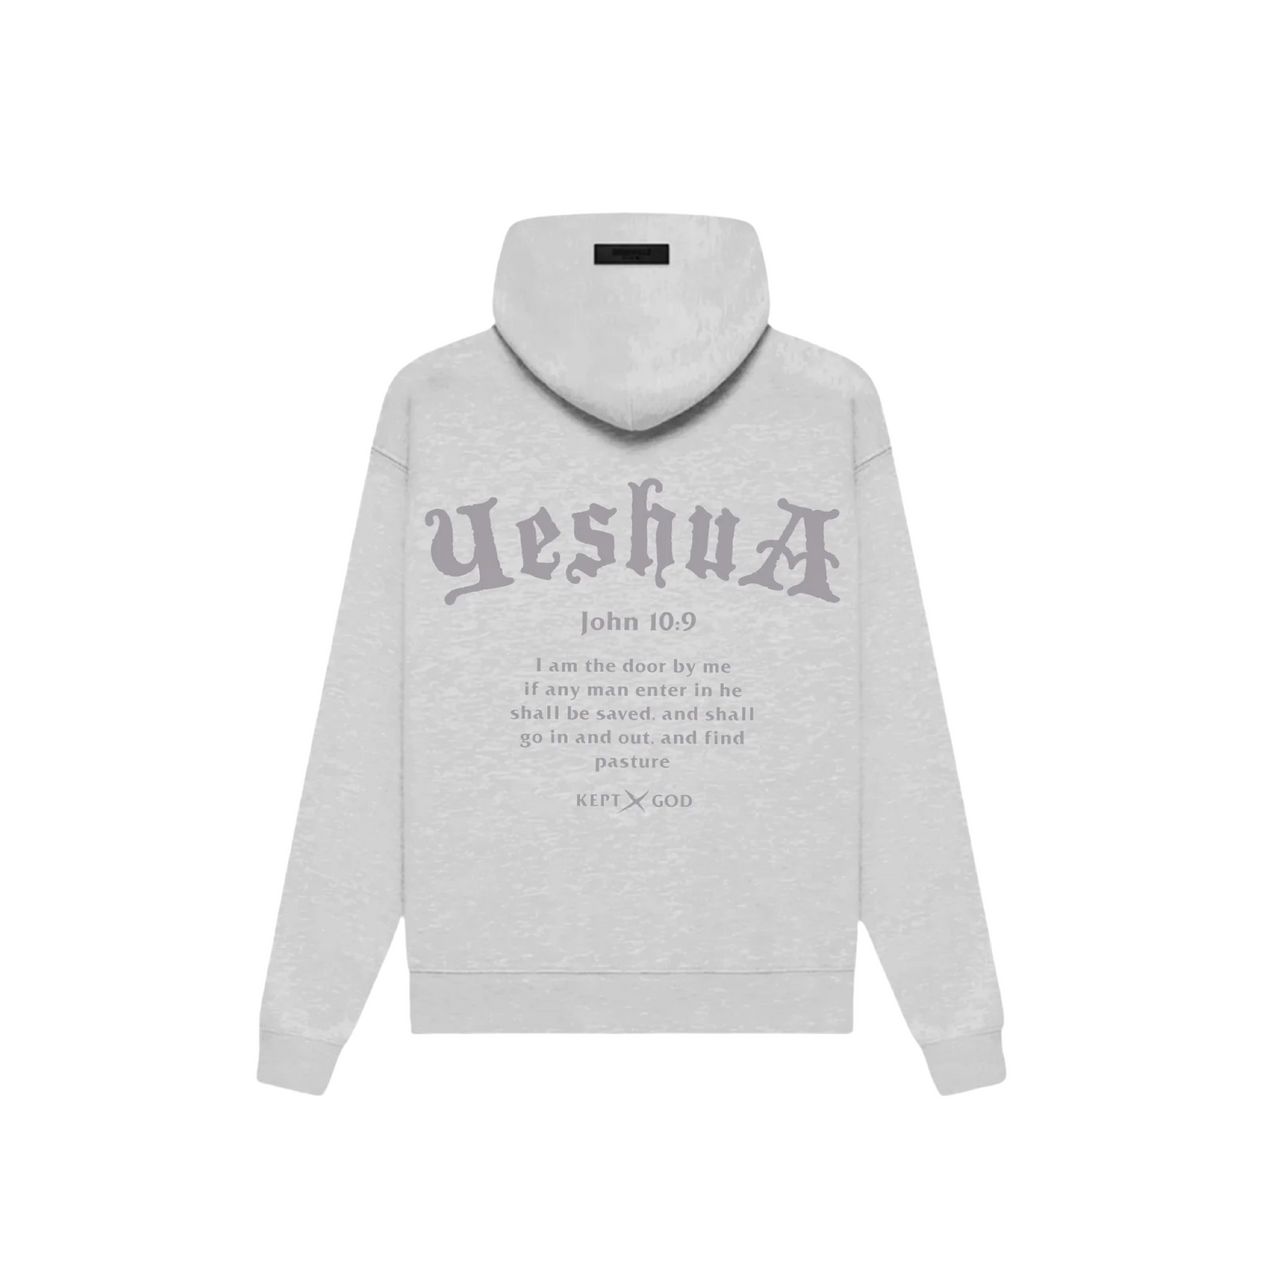 Yeshua Scripture Hoodie - (Oversized Fit)